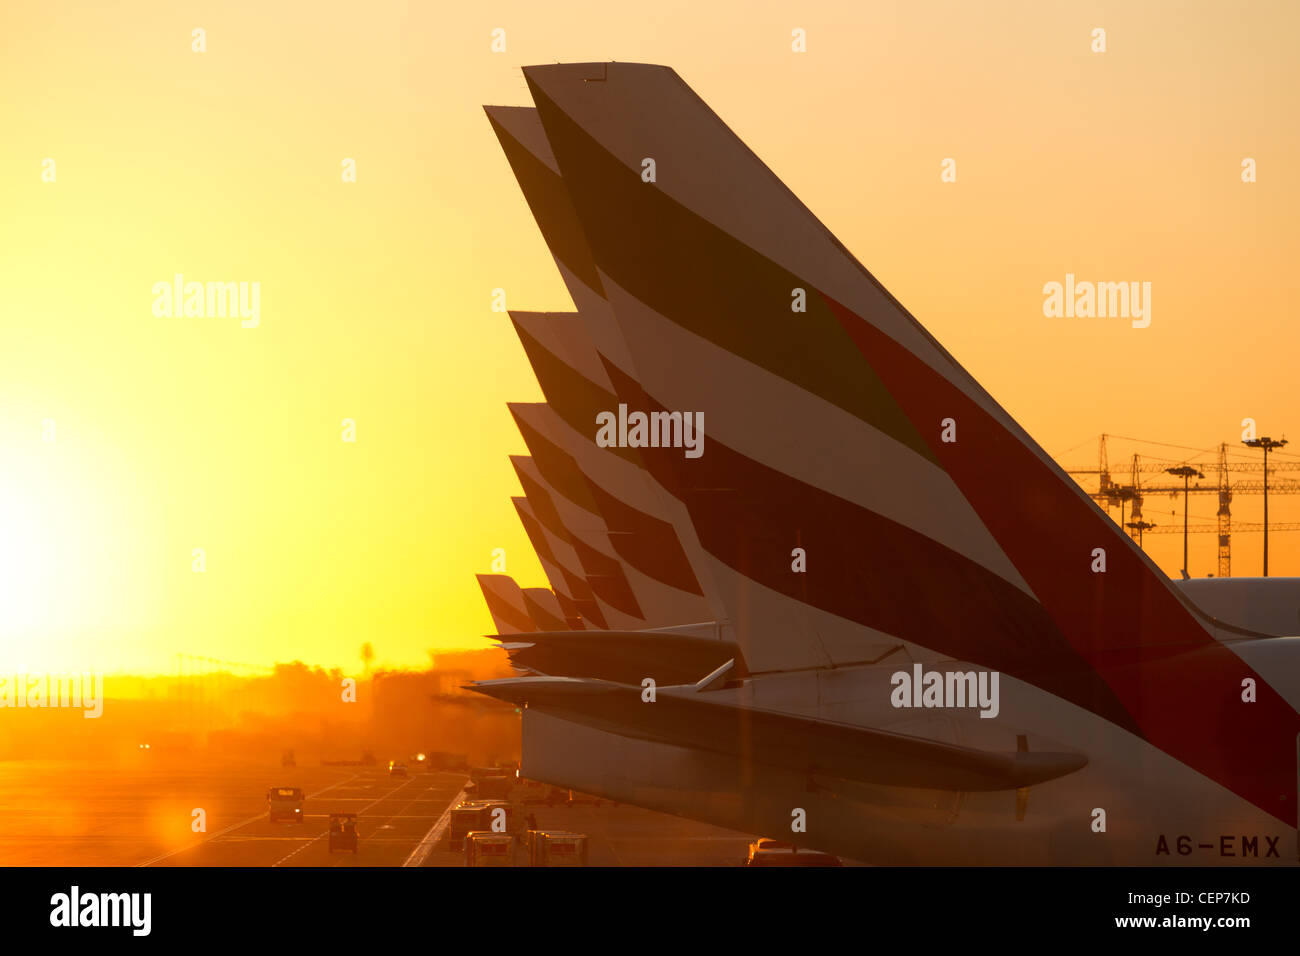 Dubai Airport, Dubai (UAE) - 23 December, 2011:  A Row of Emirates International Airlines planes with Emirates logo on the tail. Stock Photo